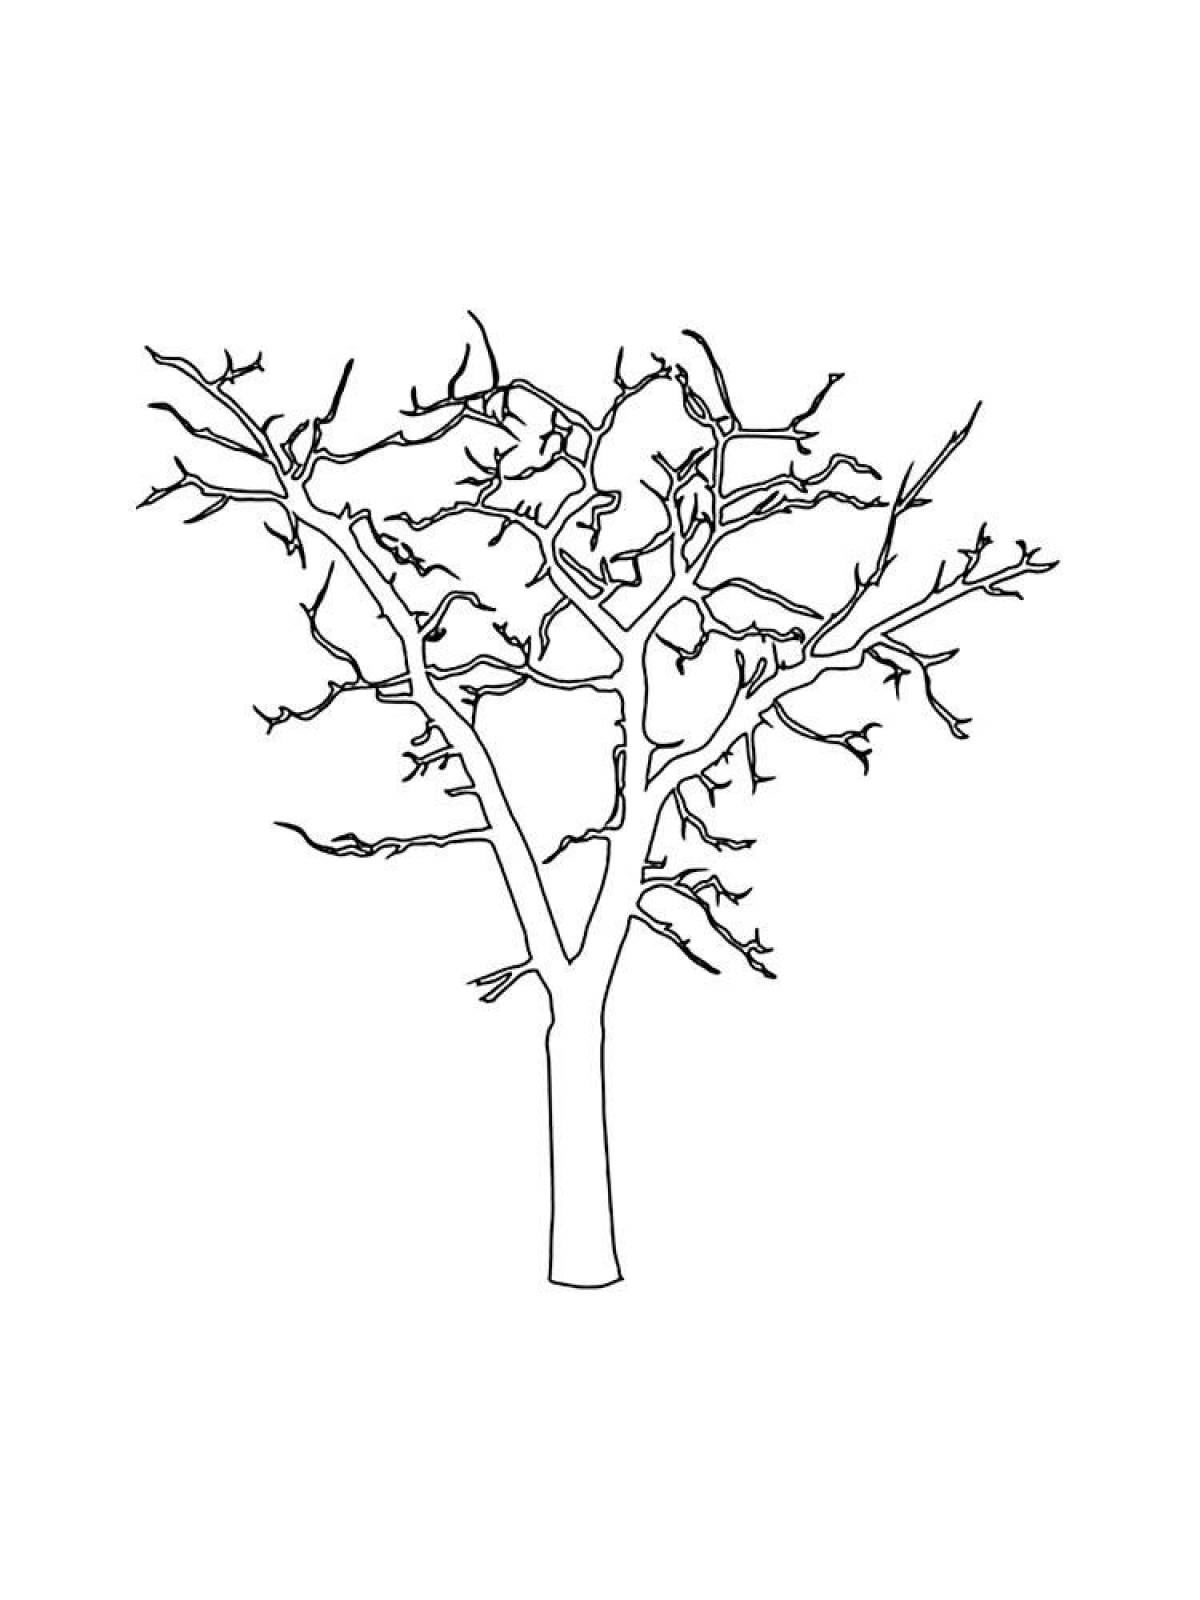 Coloring bright tree without leaves for children